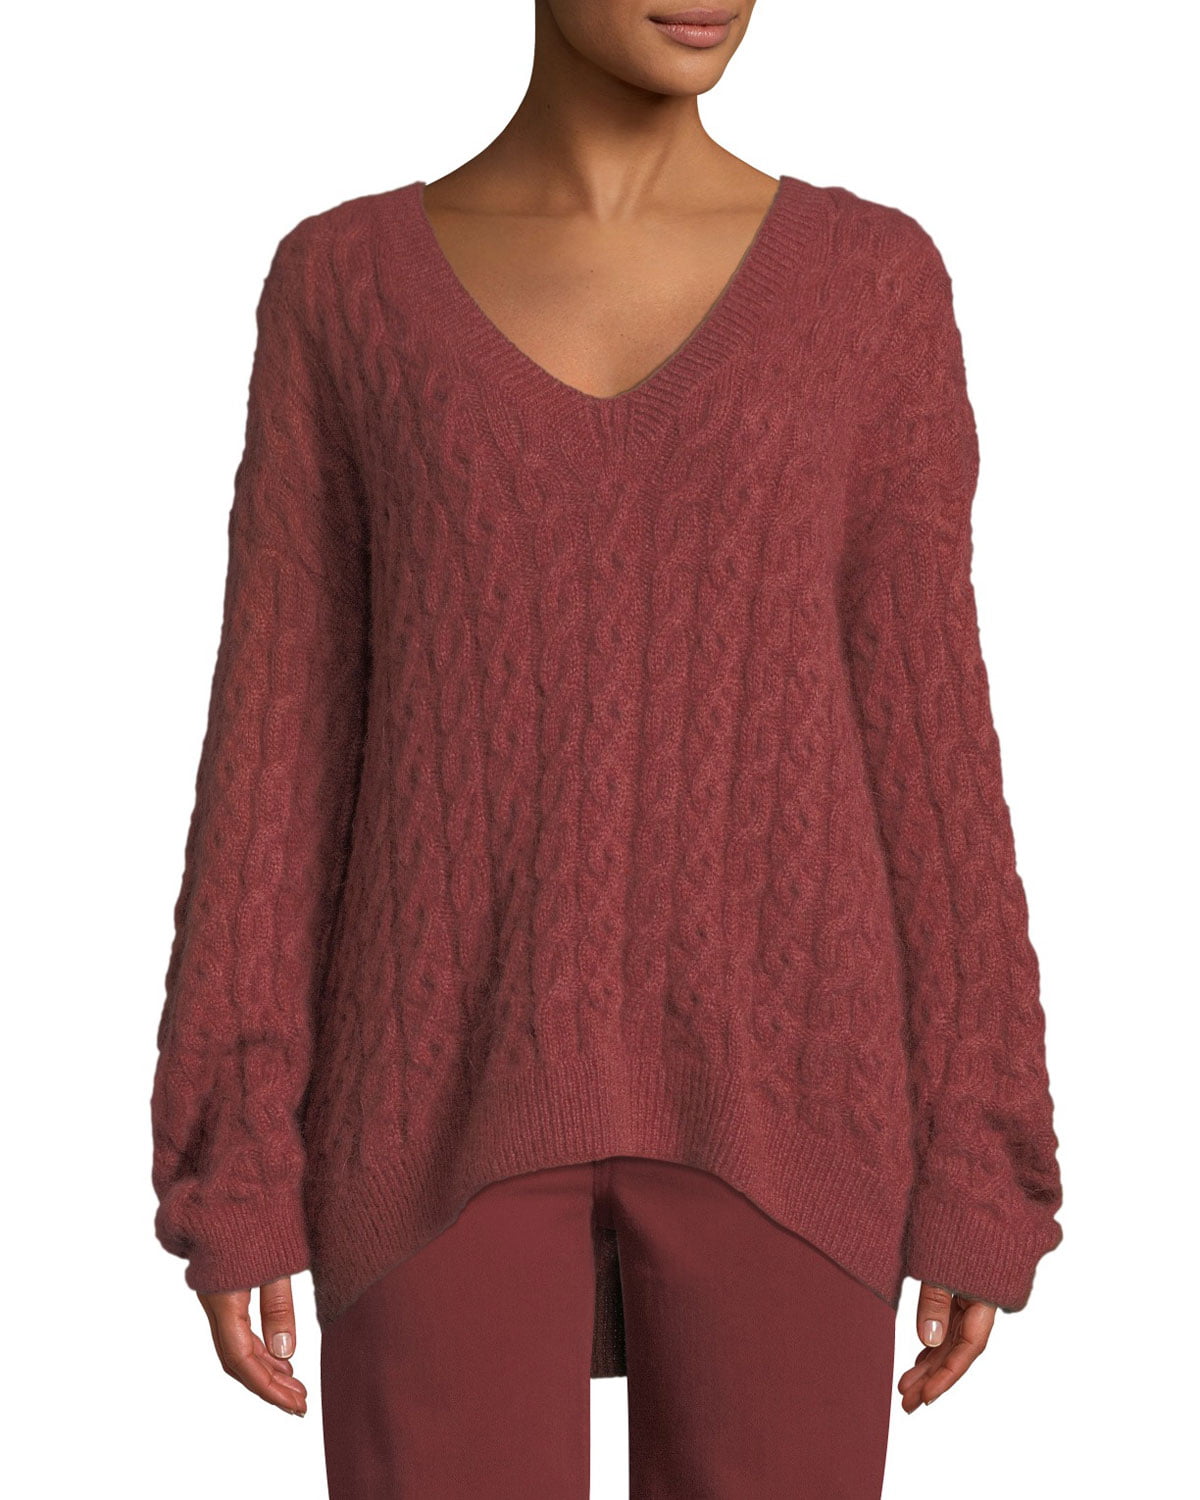 Vince - Vince Women's Cable Knit V Neck Sweater, Anise, X-Large ...